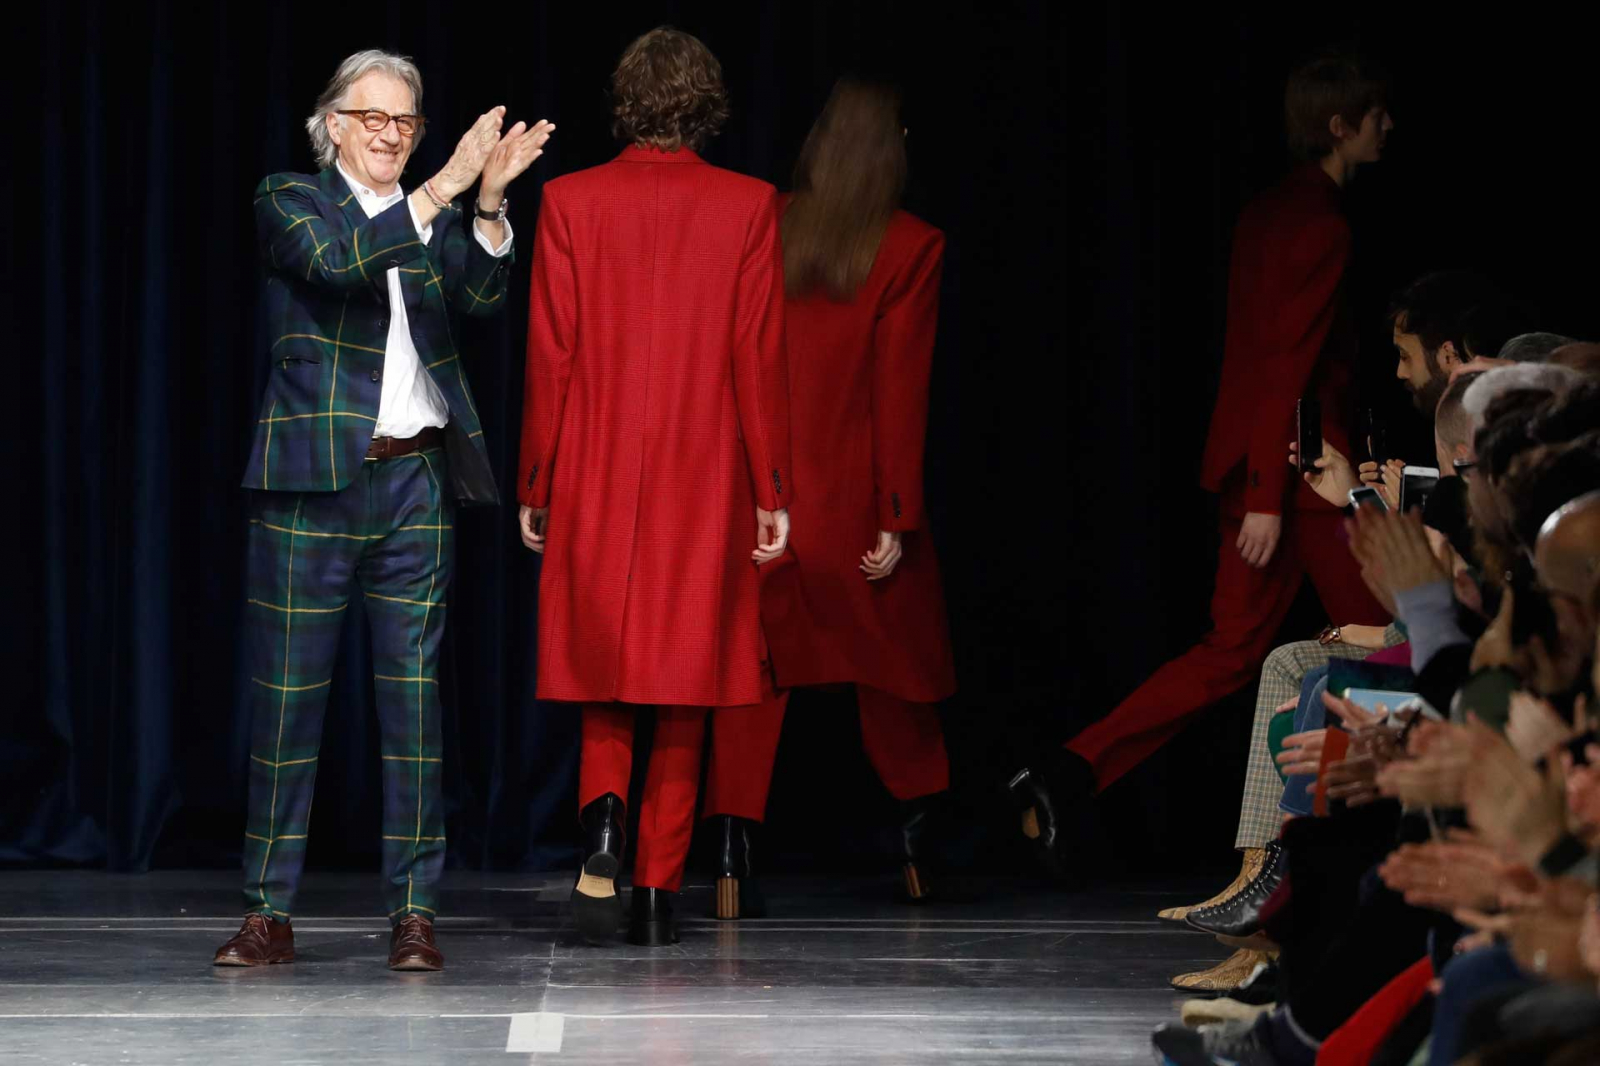 Paul Smith at the finale of his mens and womens Autumn/Winter 2018 show in Paris (Photo: Getty Images)